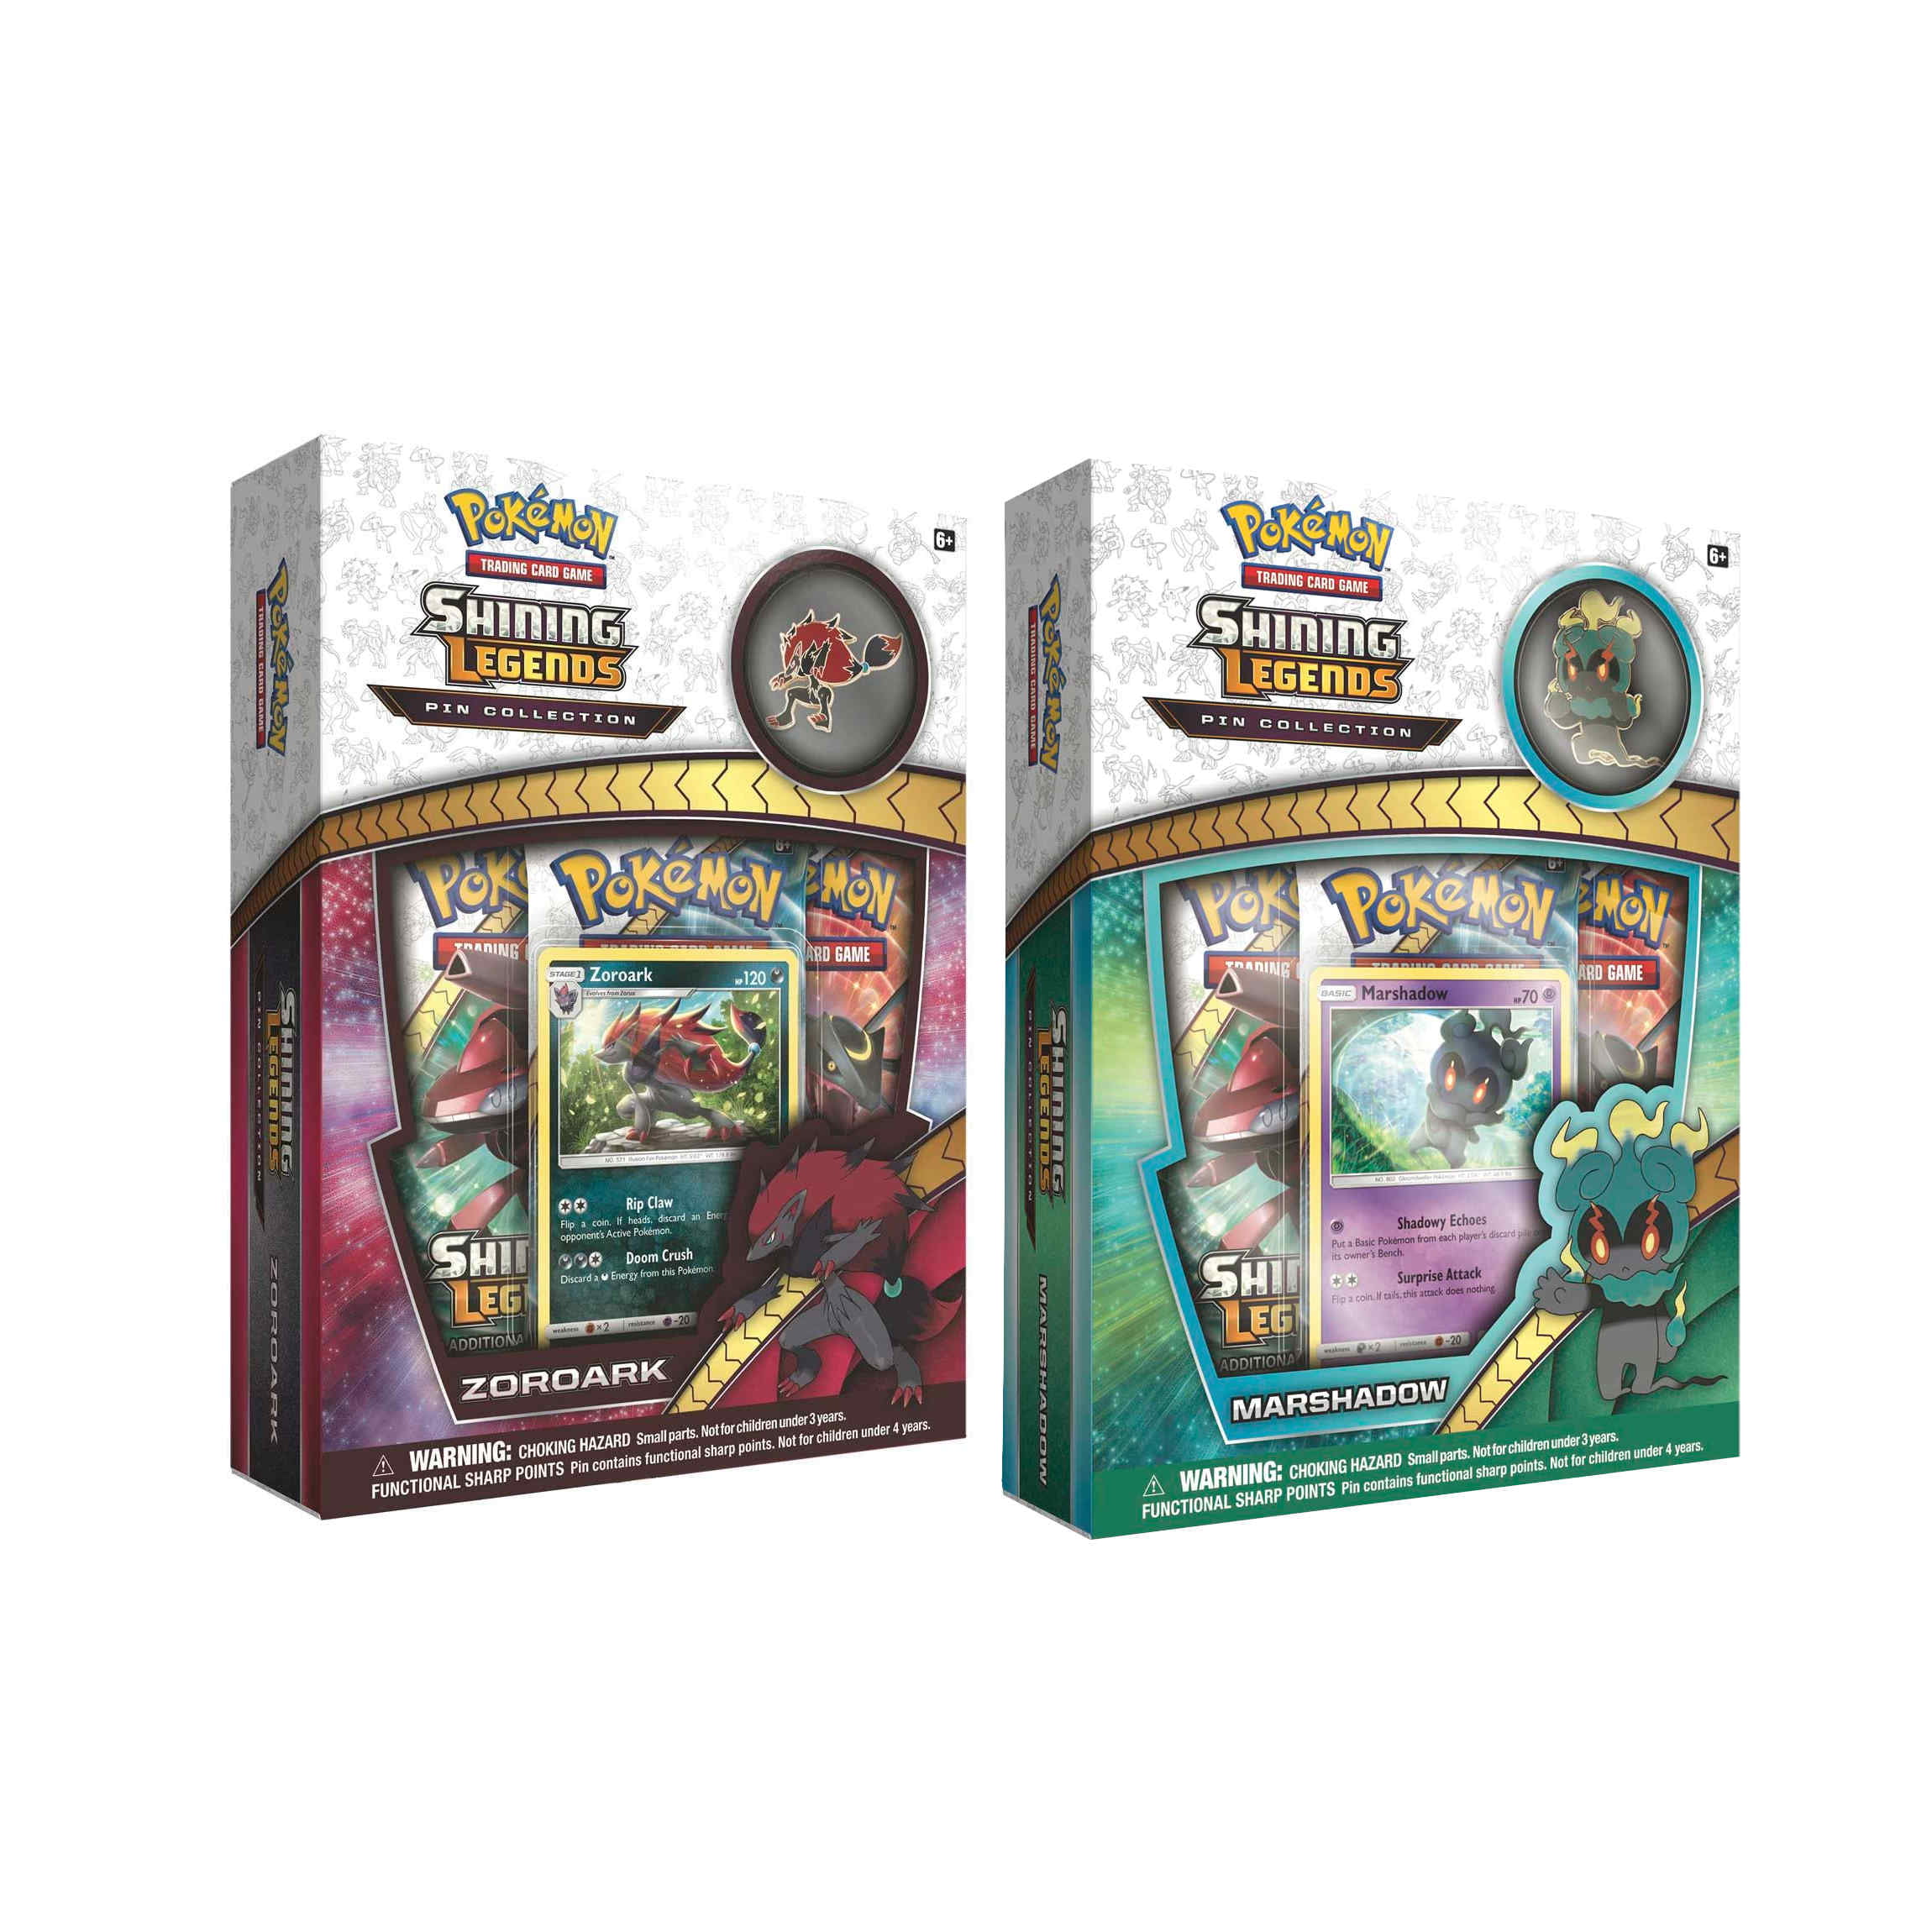 Marshadow Shining Legends Pin Collection Box FACTORY SEALED Pokemon TCG 